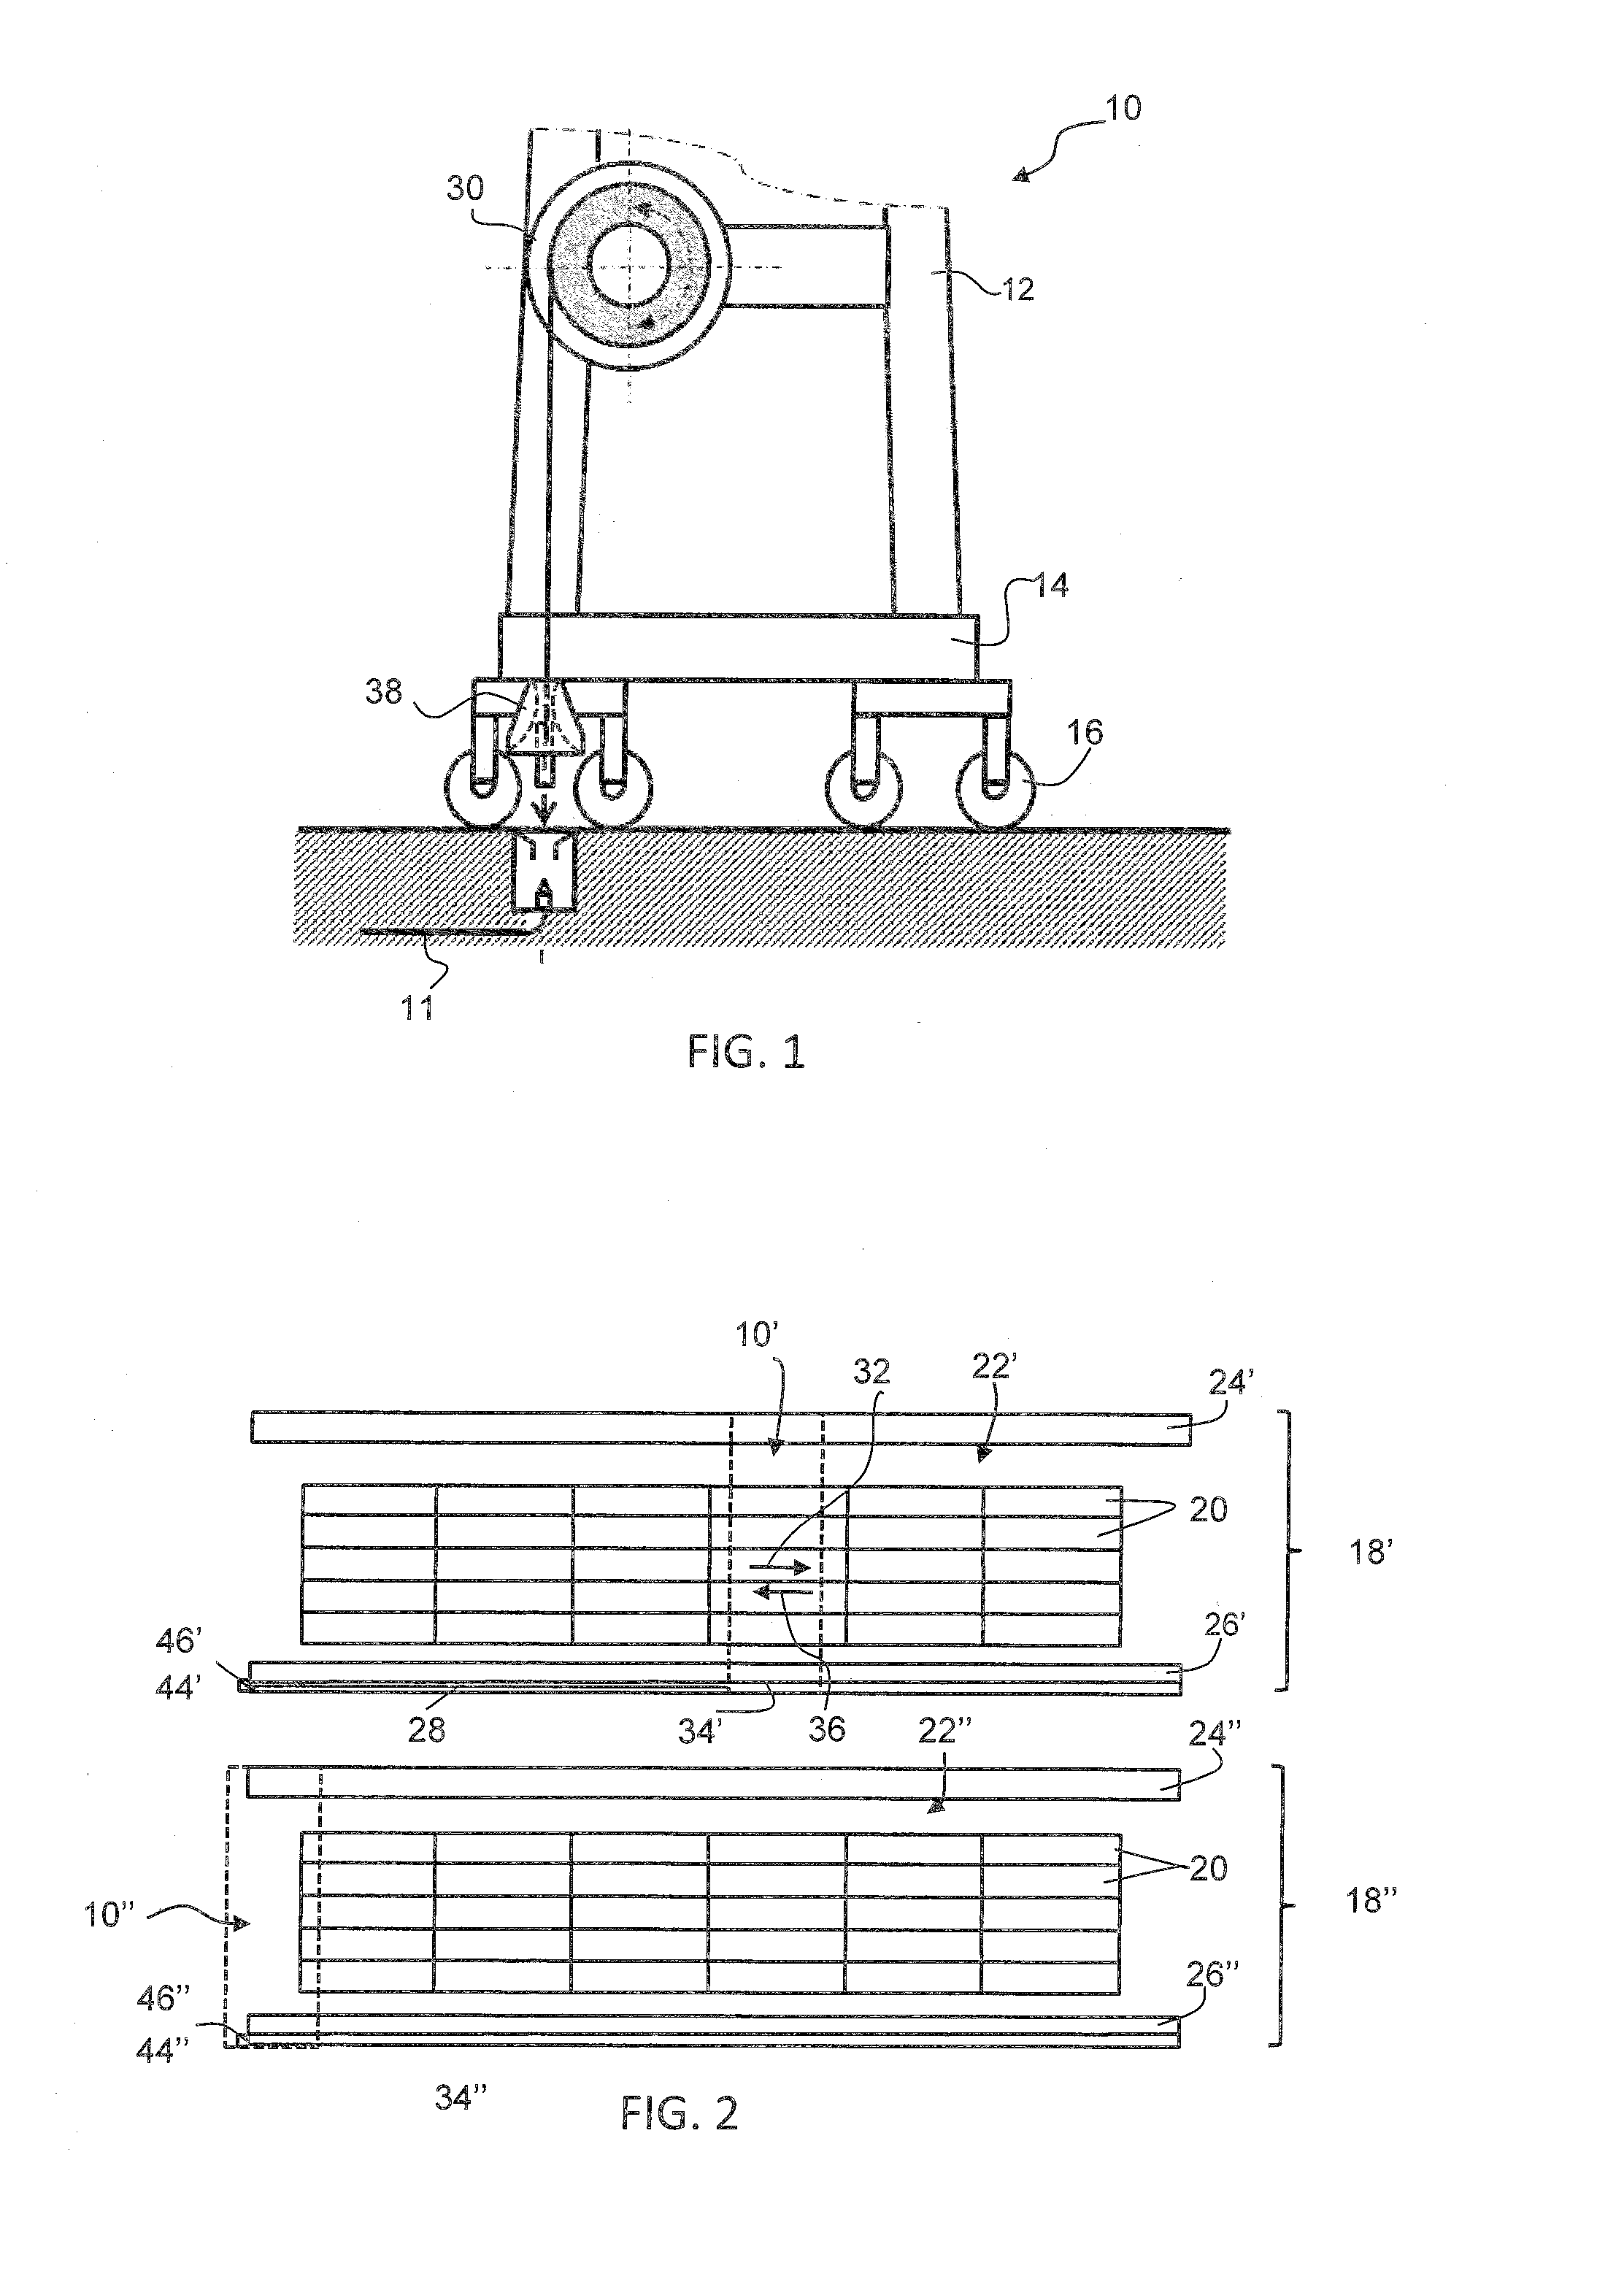 A Device For Automatically Connecting A Vehicle To An Electric Power Supply